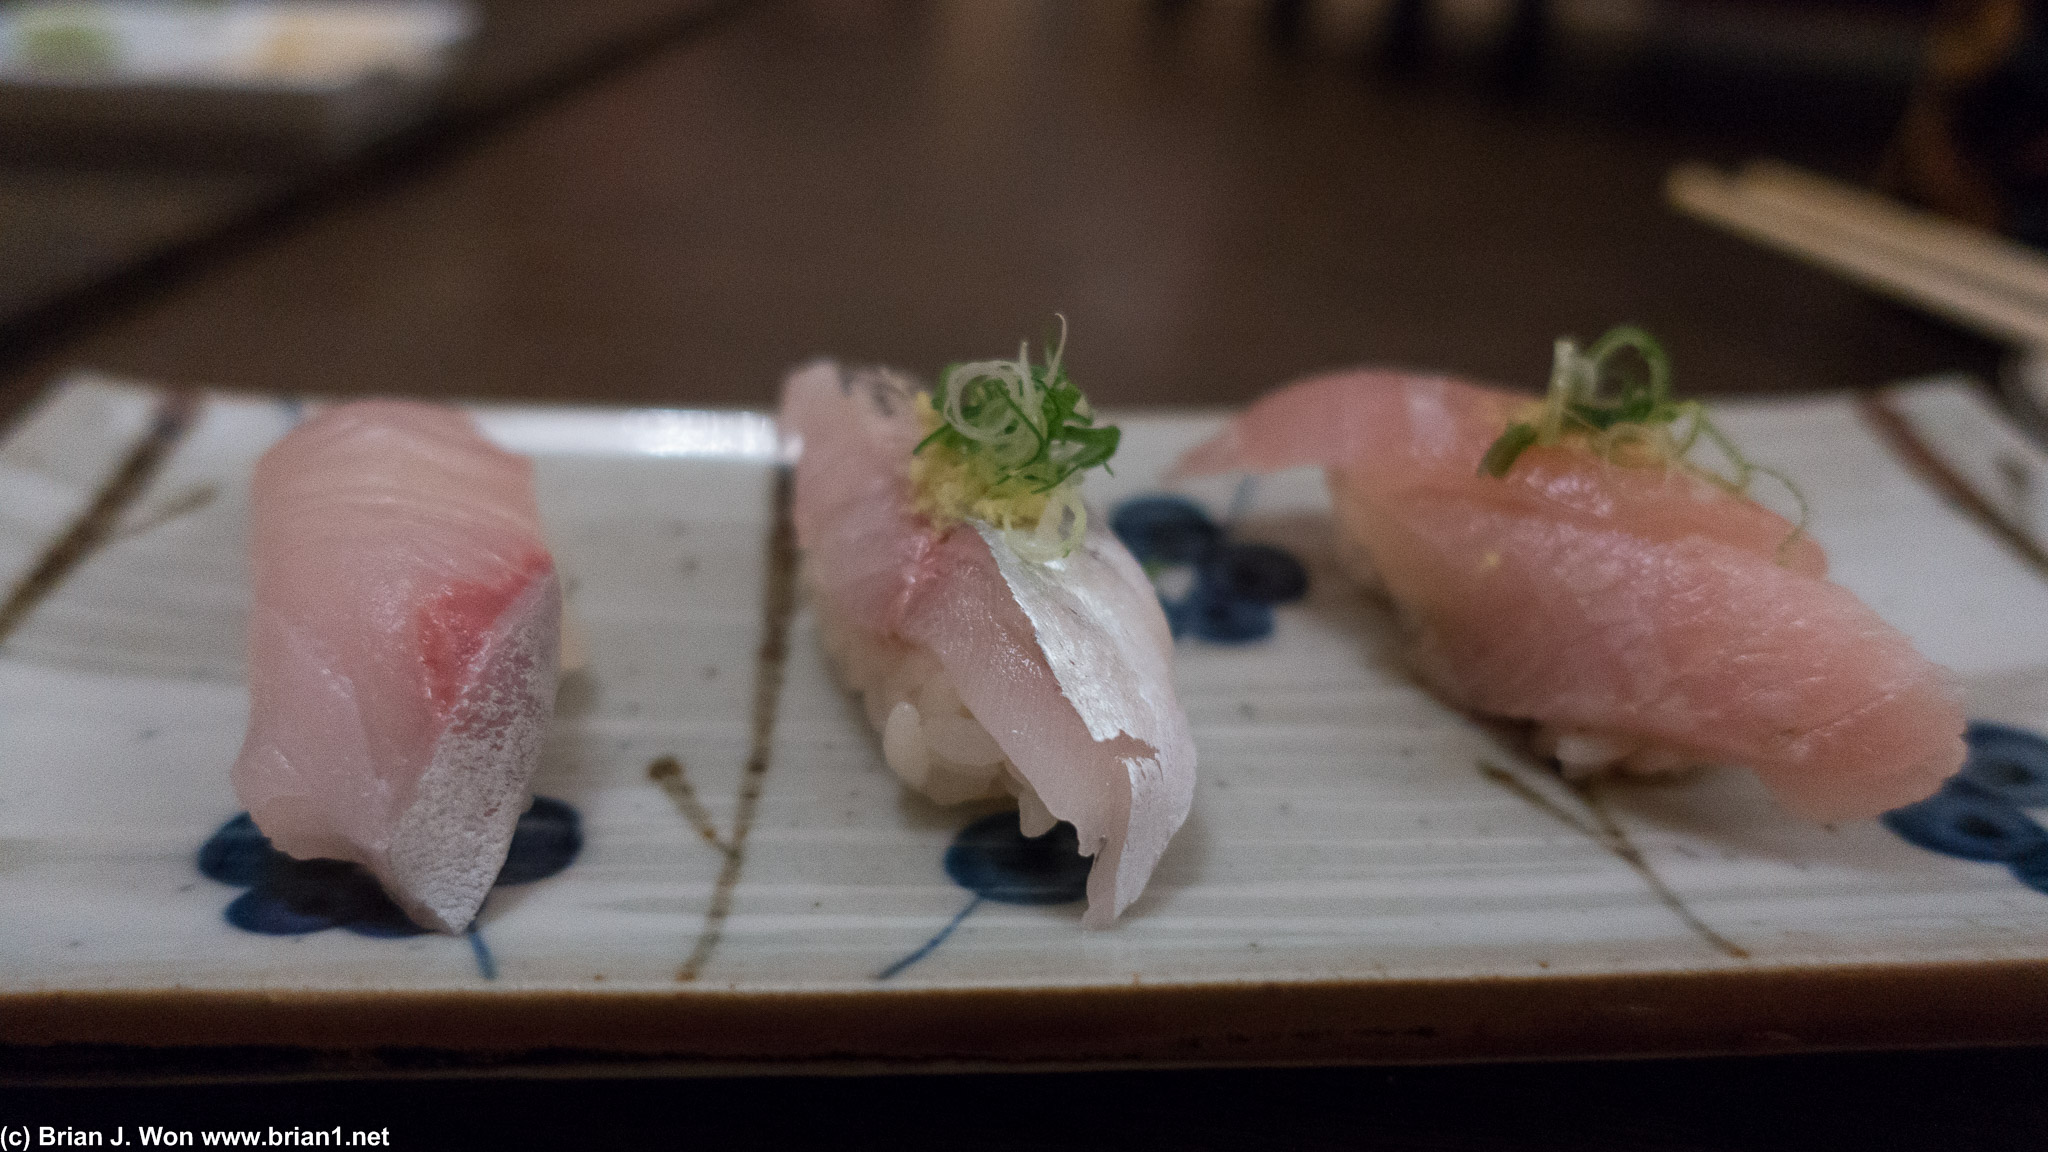 Albacore, amberjack, snapper. 2nd kind of snapper, one was red, one was Japanese?